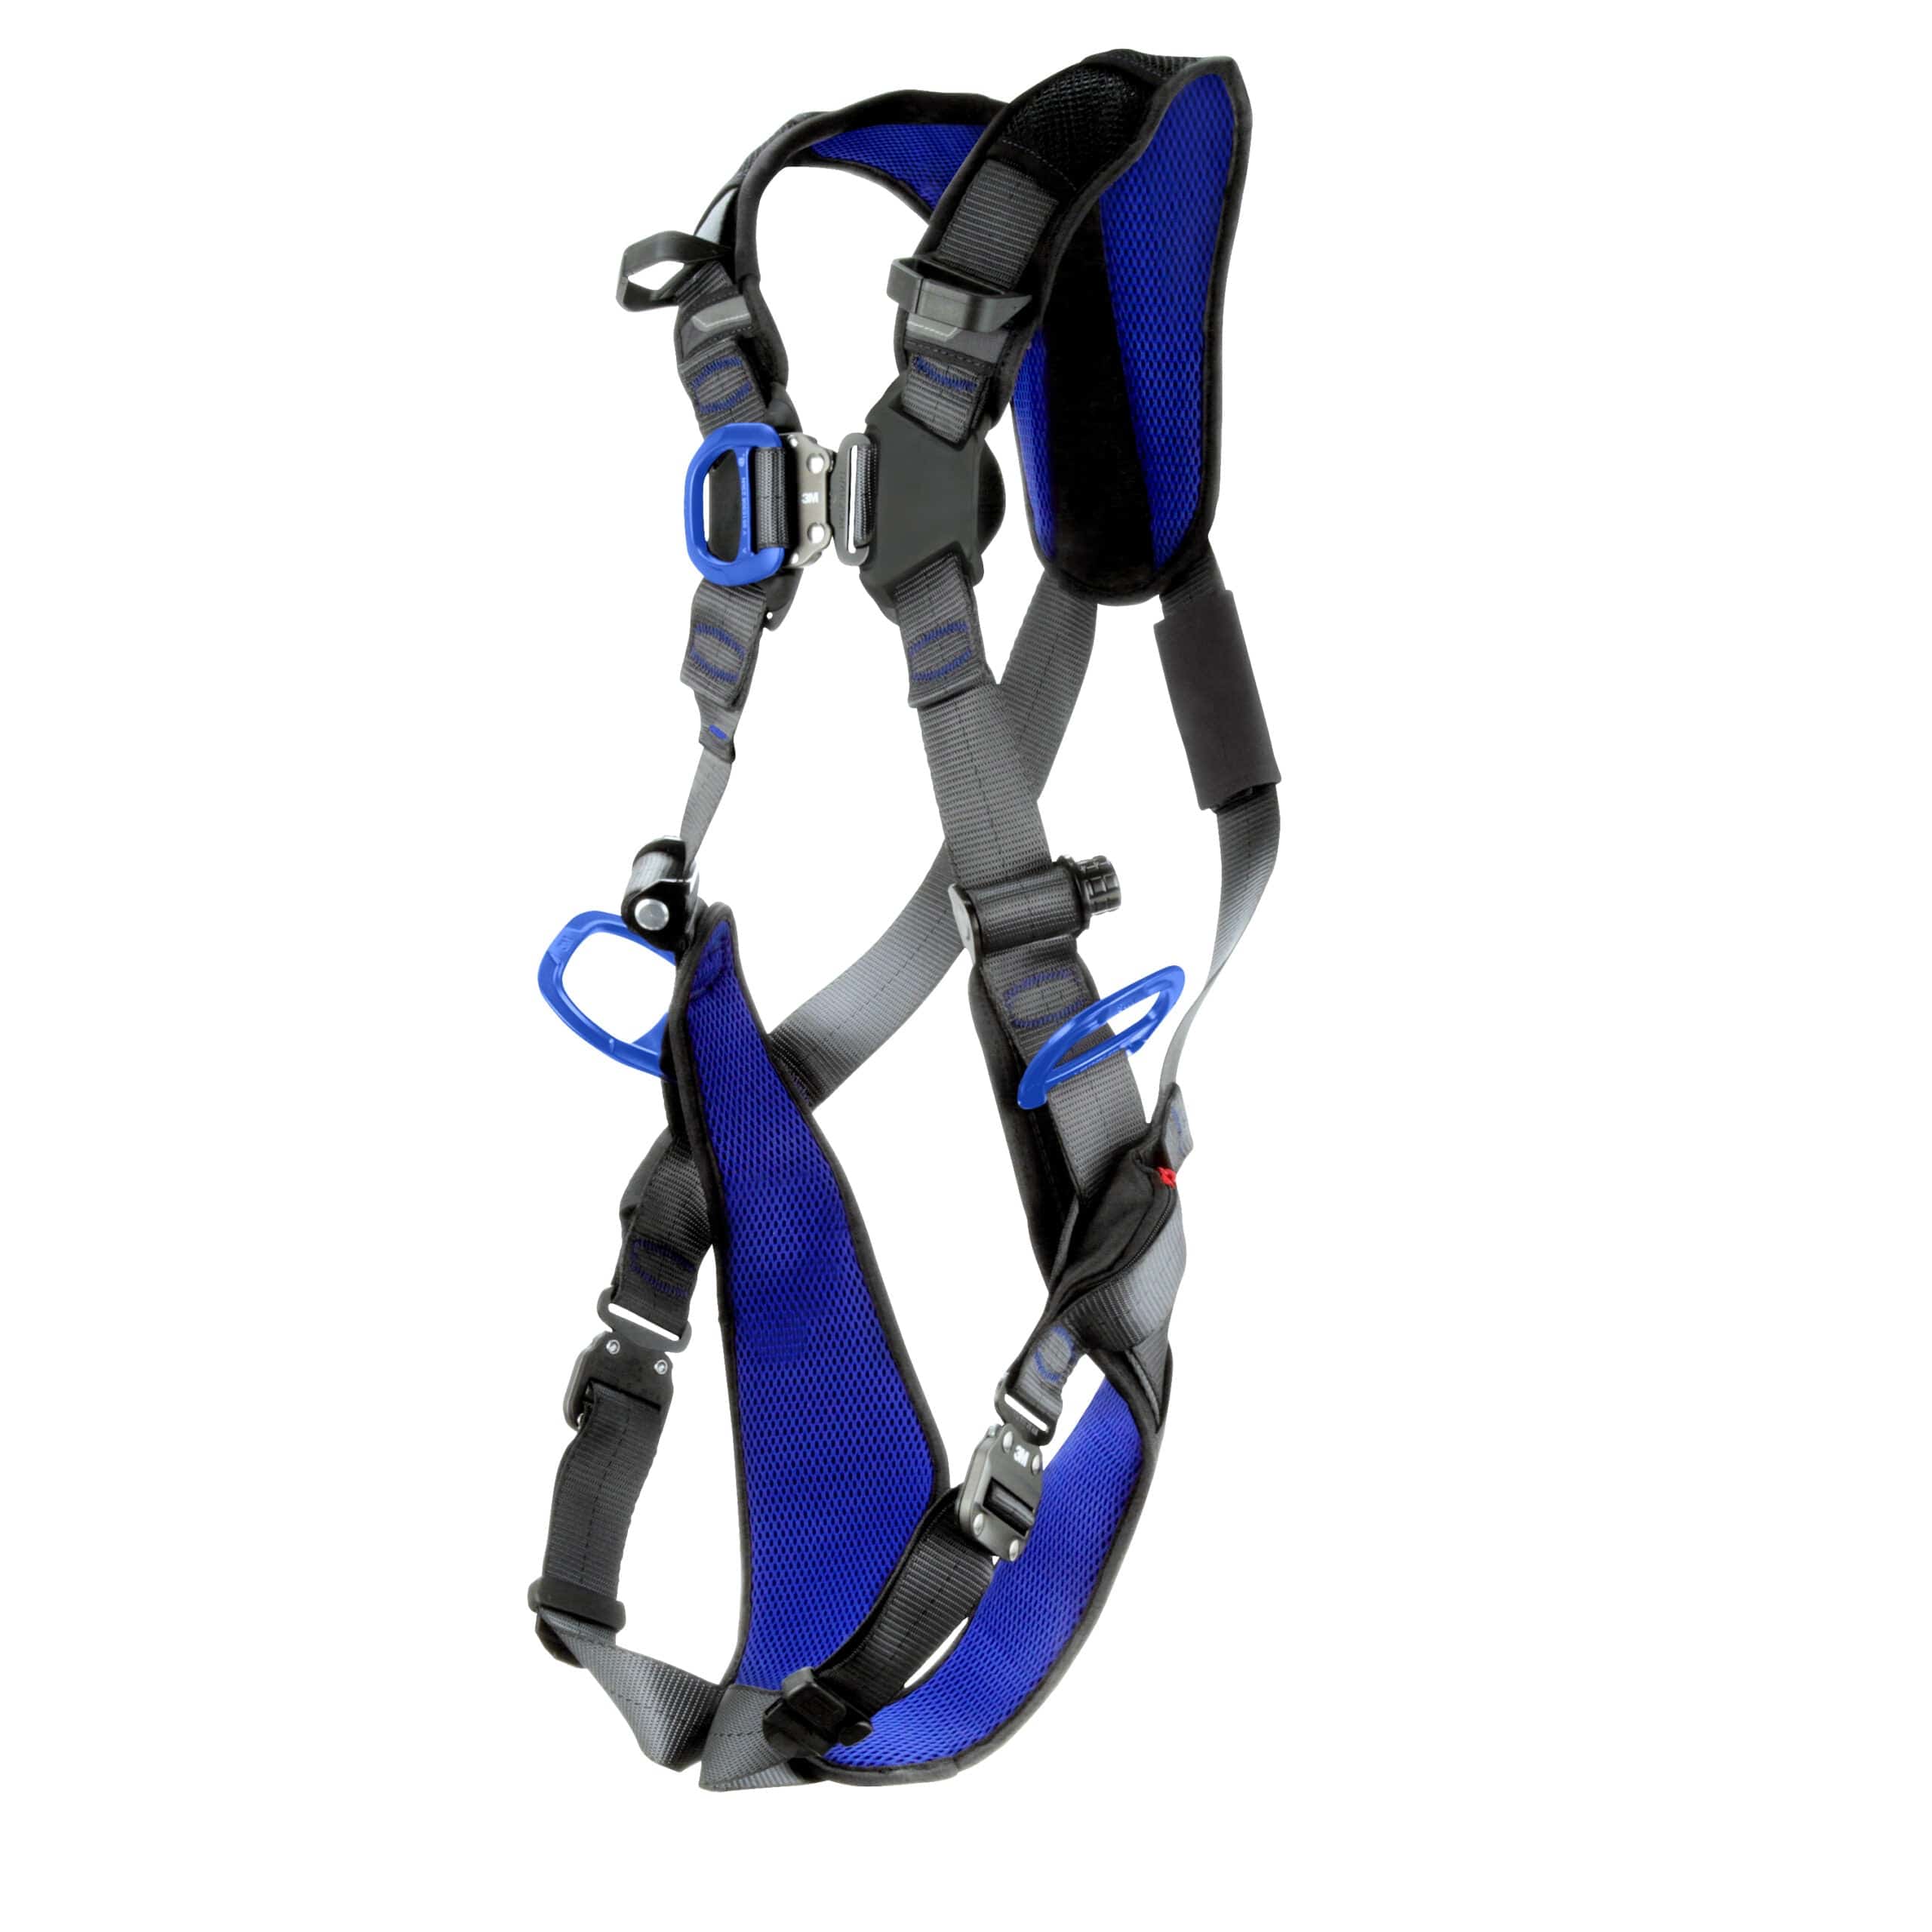 3M DBI SALA ExoFit XE200 Comfort Wind Energy Safety Harness - SecureHeights